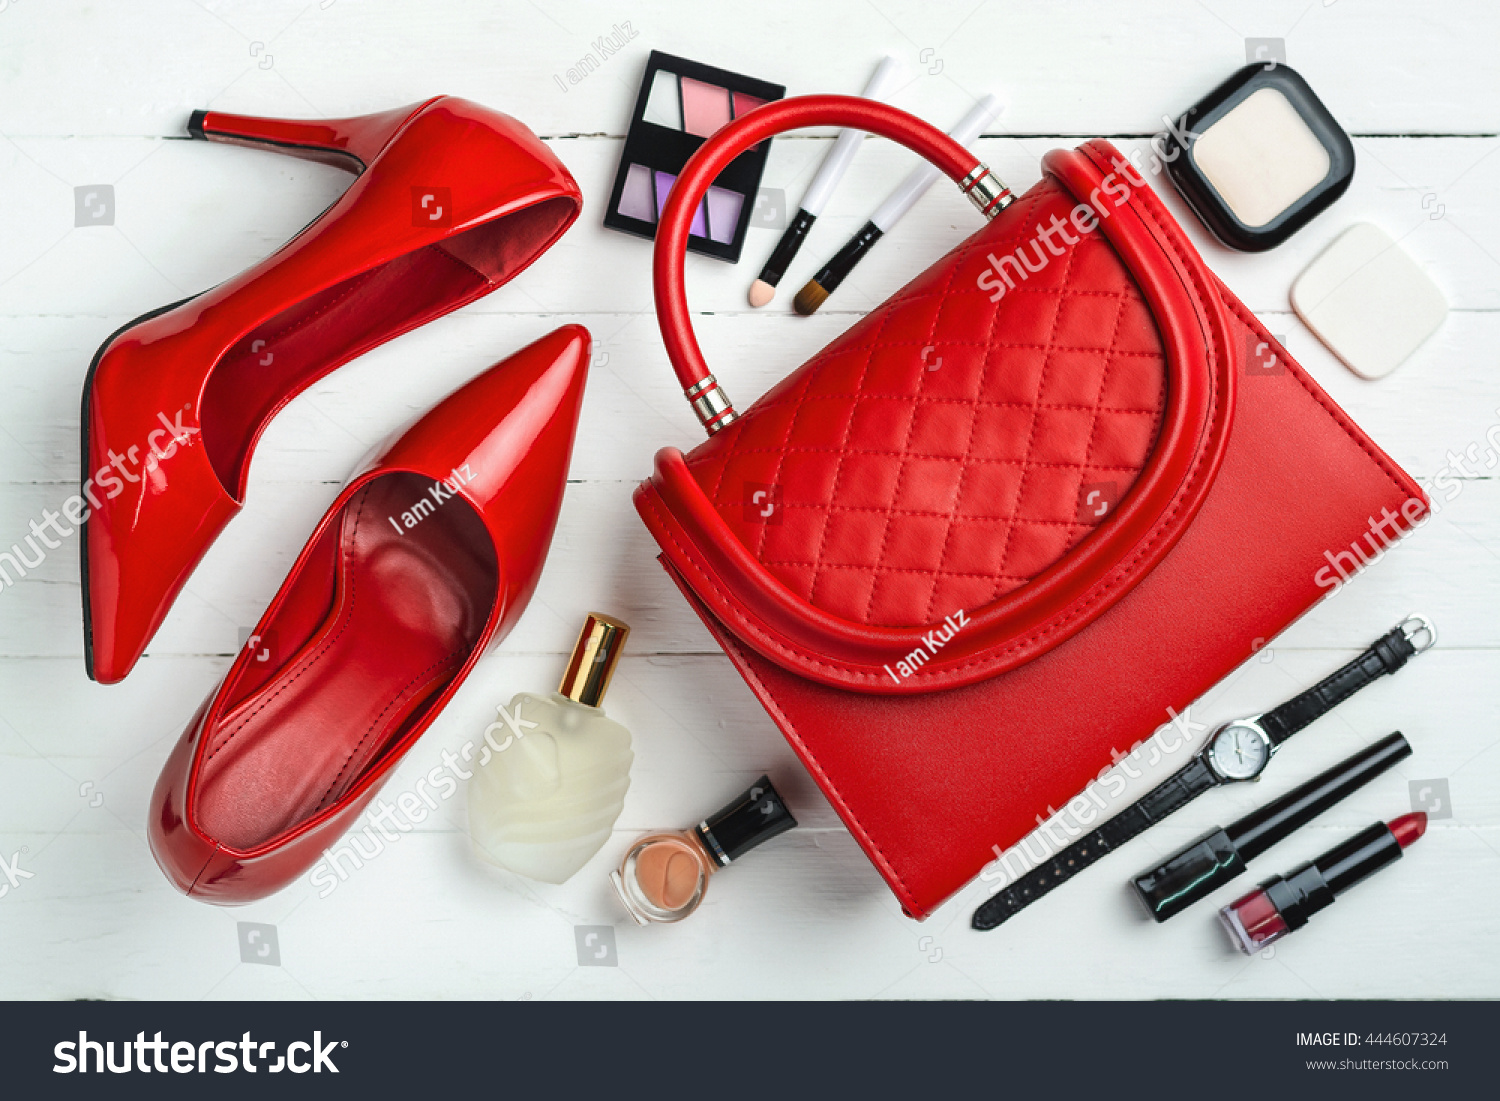 Overhead view of essential beauty items, Top view of red leather bag, red shoes and cosmetic #444607324